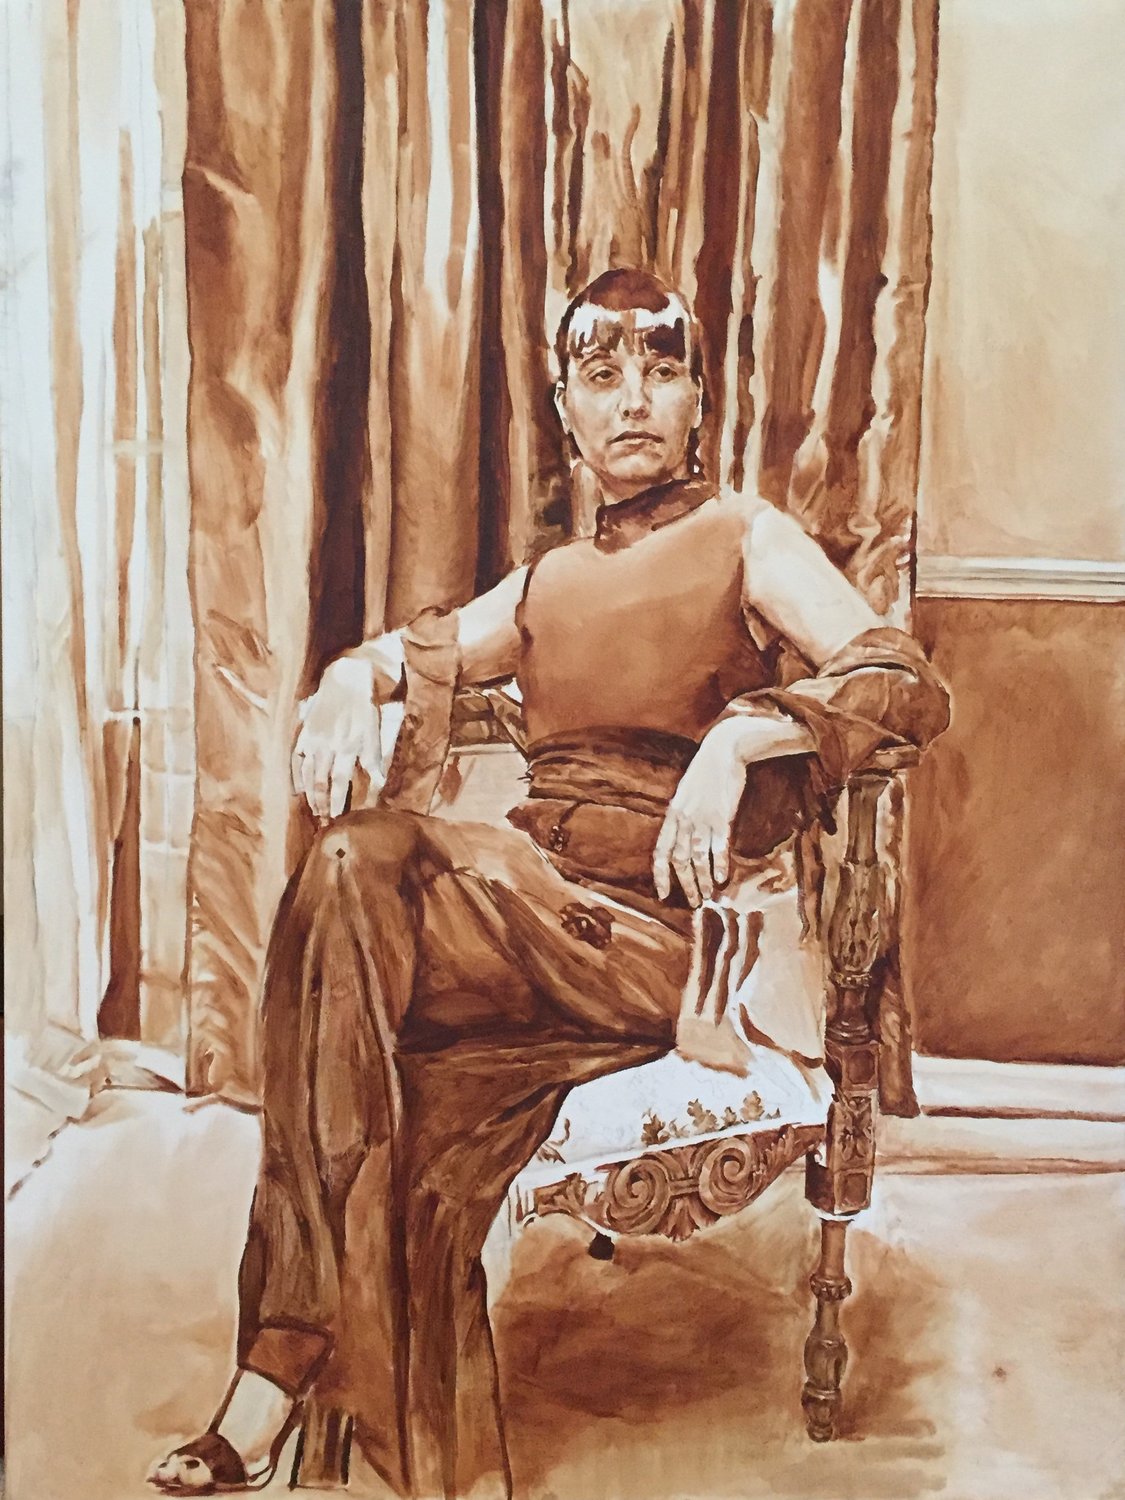 Joshua Cooper’s skill in oil painting can be seen in his “Shana in Sepia” work. Cooper will paint a mural on one wall of the Lightner Museum.